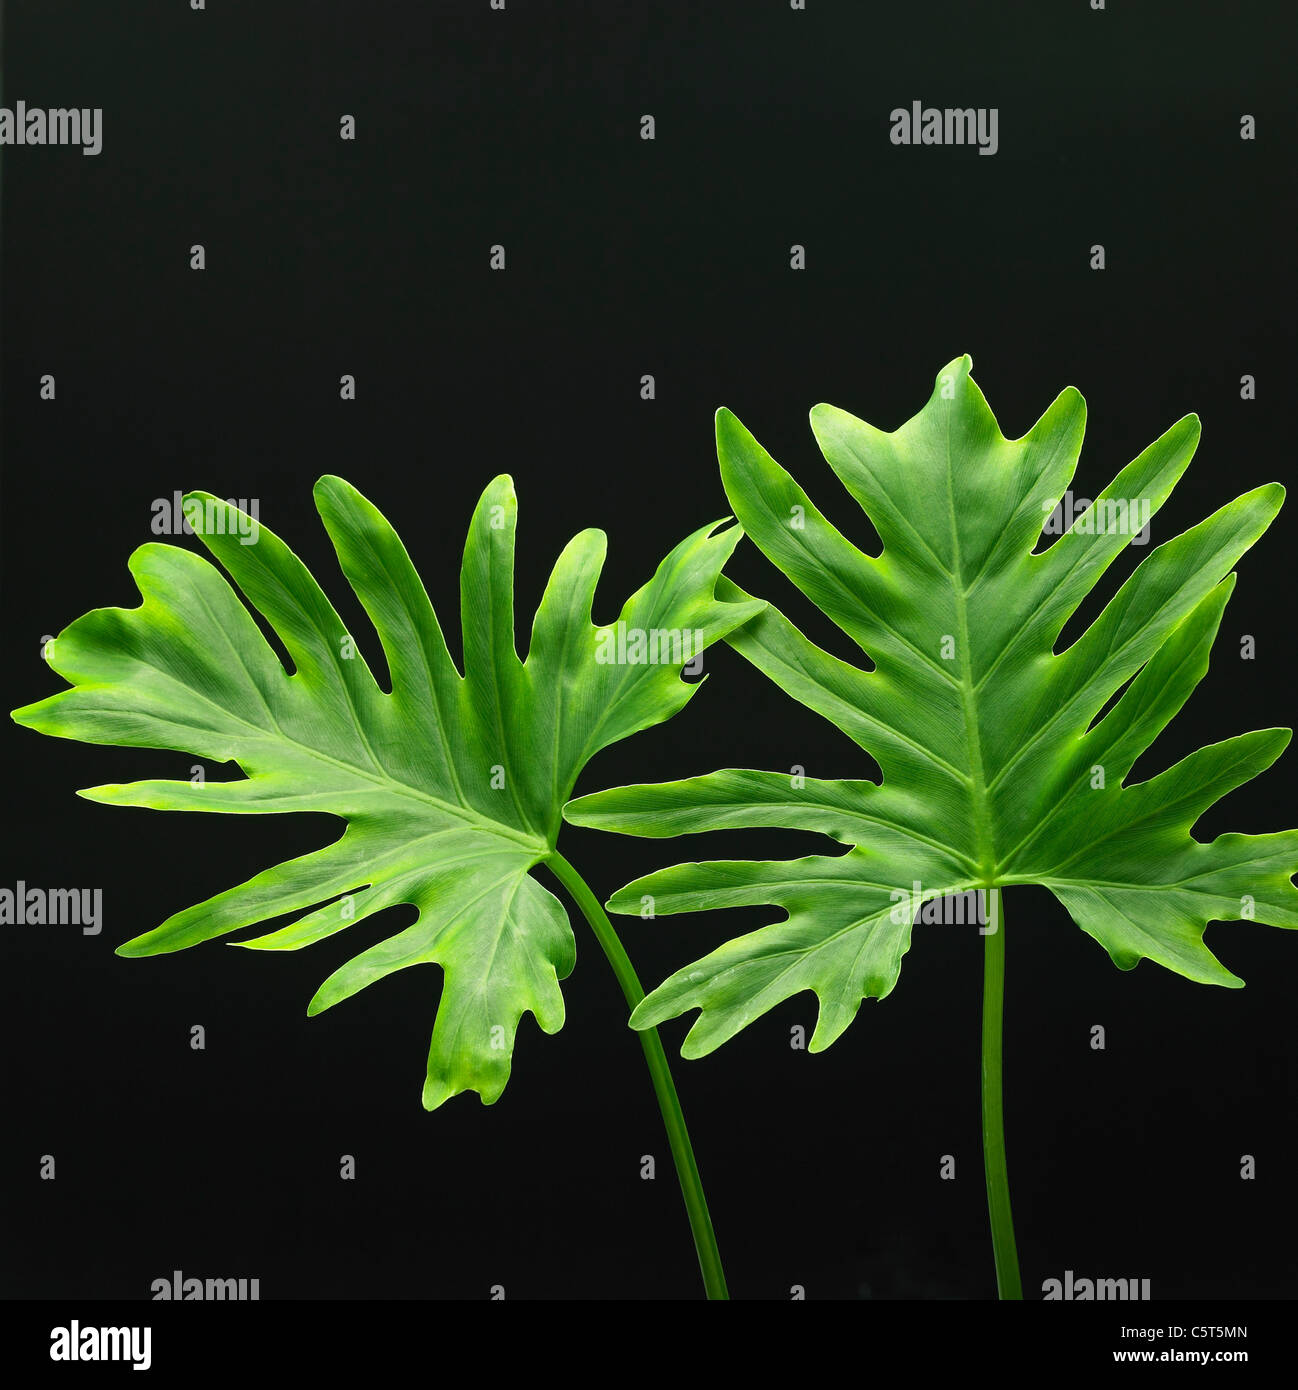 Plant leaves Stock Photo